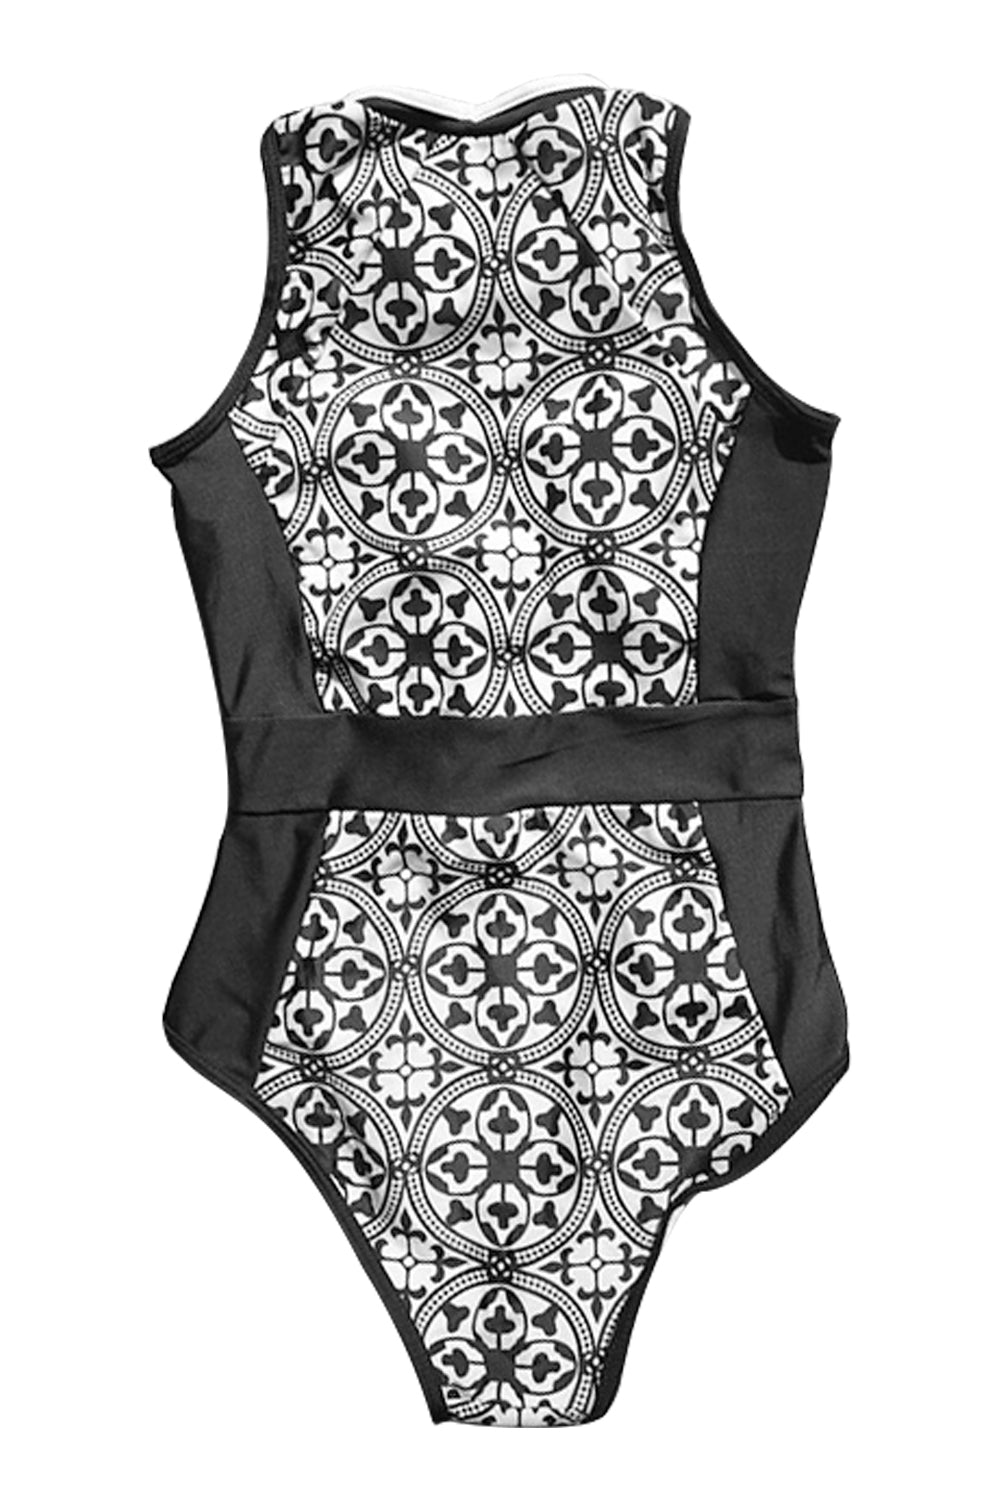 Iyasson Print and Stripe Design One-piece Swimsuit